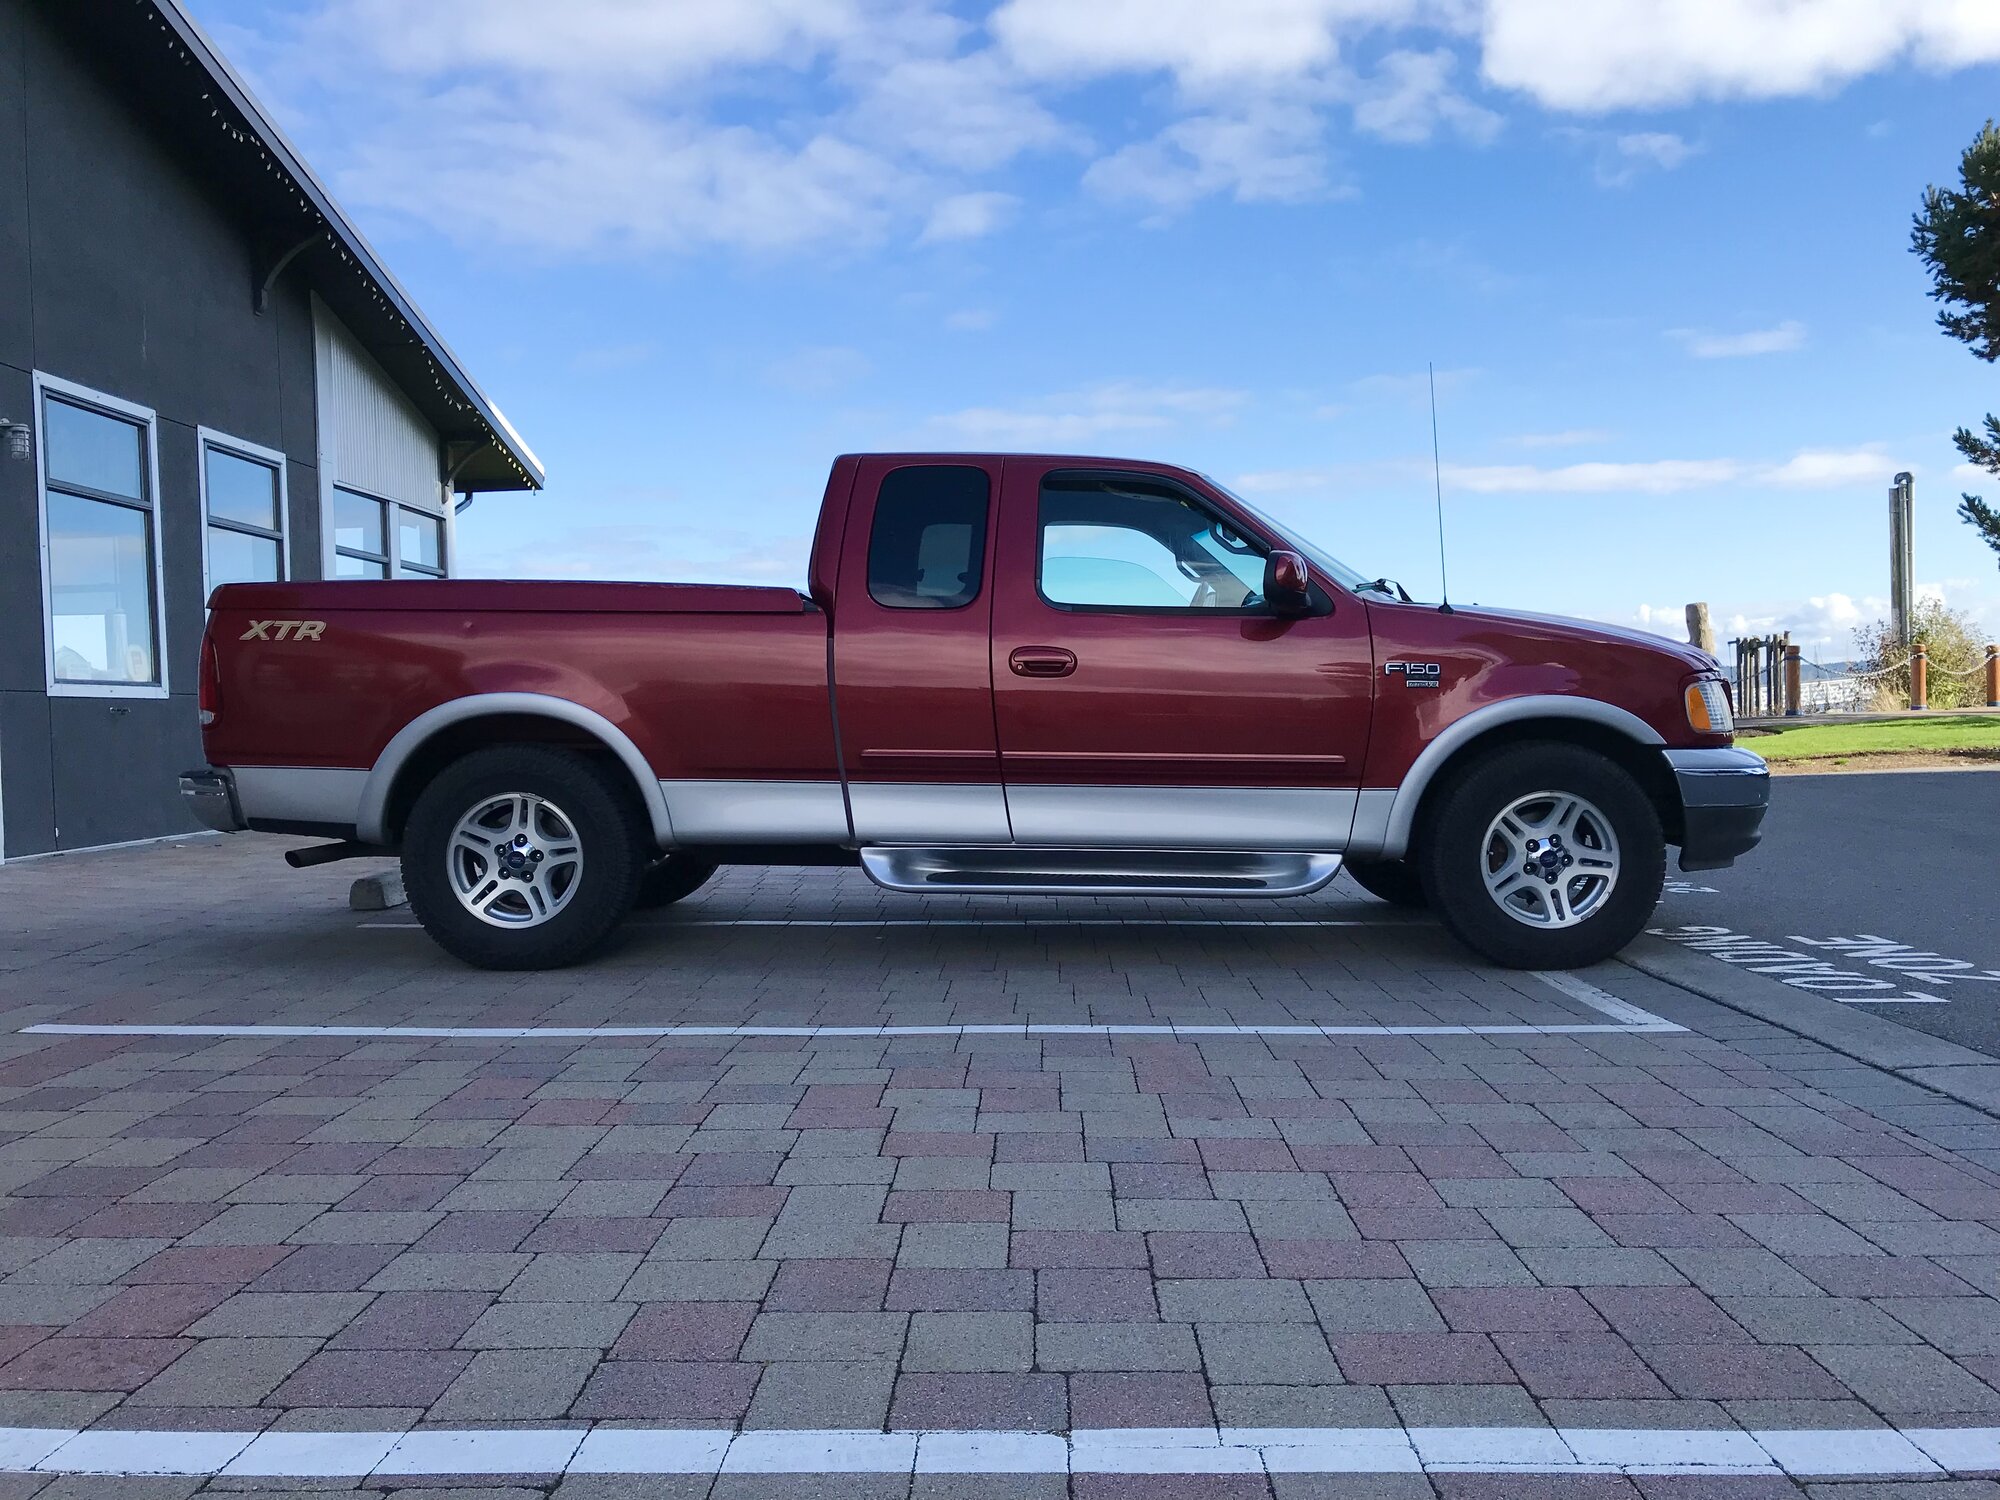 2002 Ford F150 - 2002 F150 XLT Supercab Stock -  Ford Truck Profile